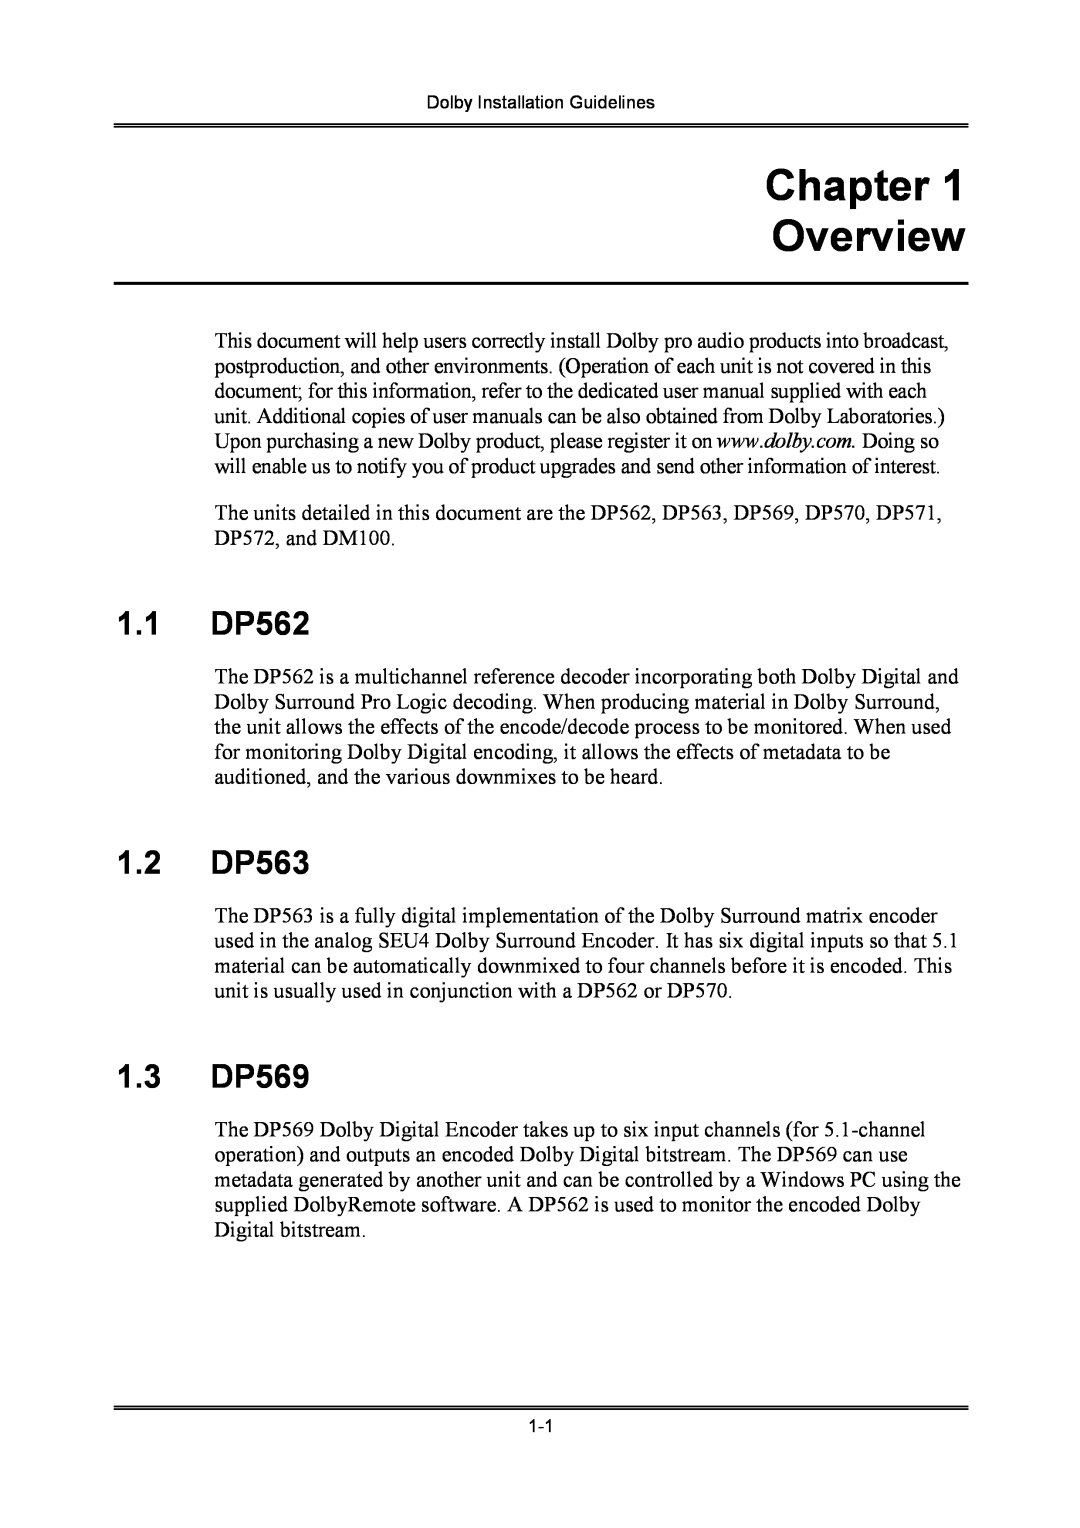 Dolby Laboratories S01/13621 manual Chapter Overview, 1.1DP562, 1.2DP563, 1.3DP569 